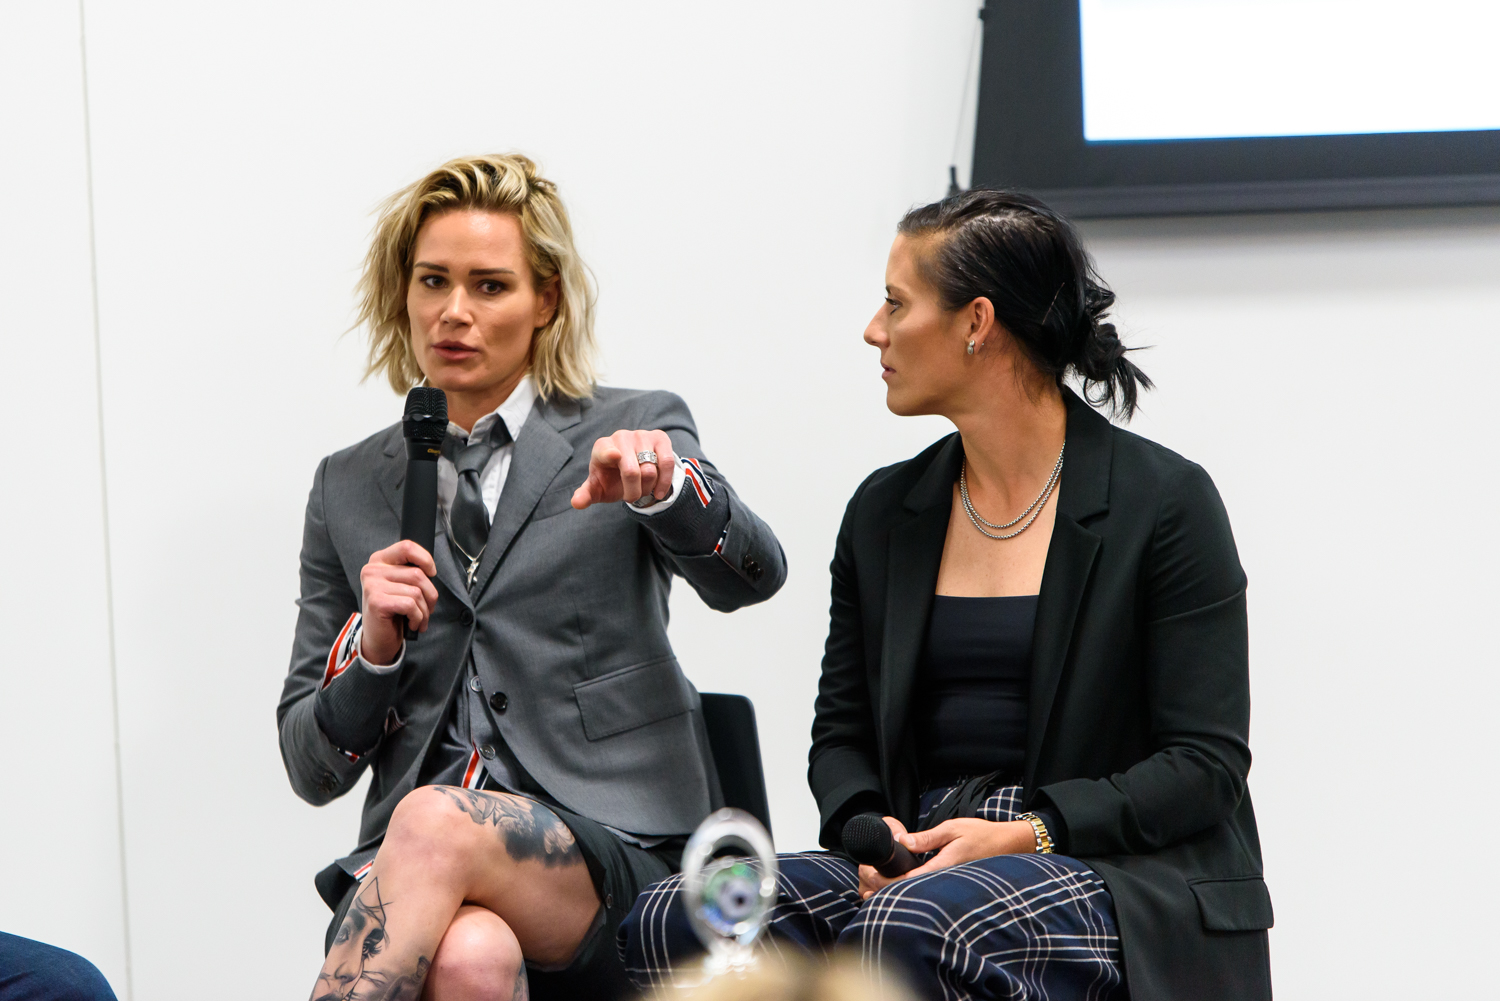 Special Guests Ali Krieger and Ashlyn Harris of the United States Women's National Soccer Team share a few words at the Co-Owner Sessions